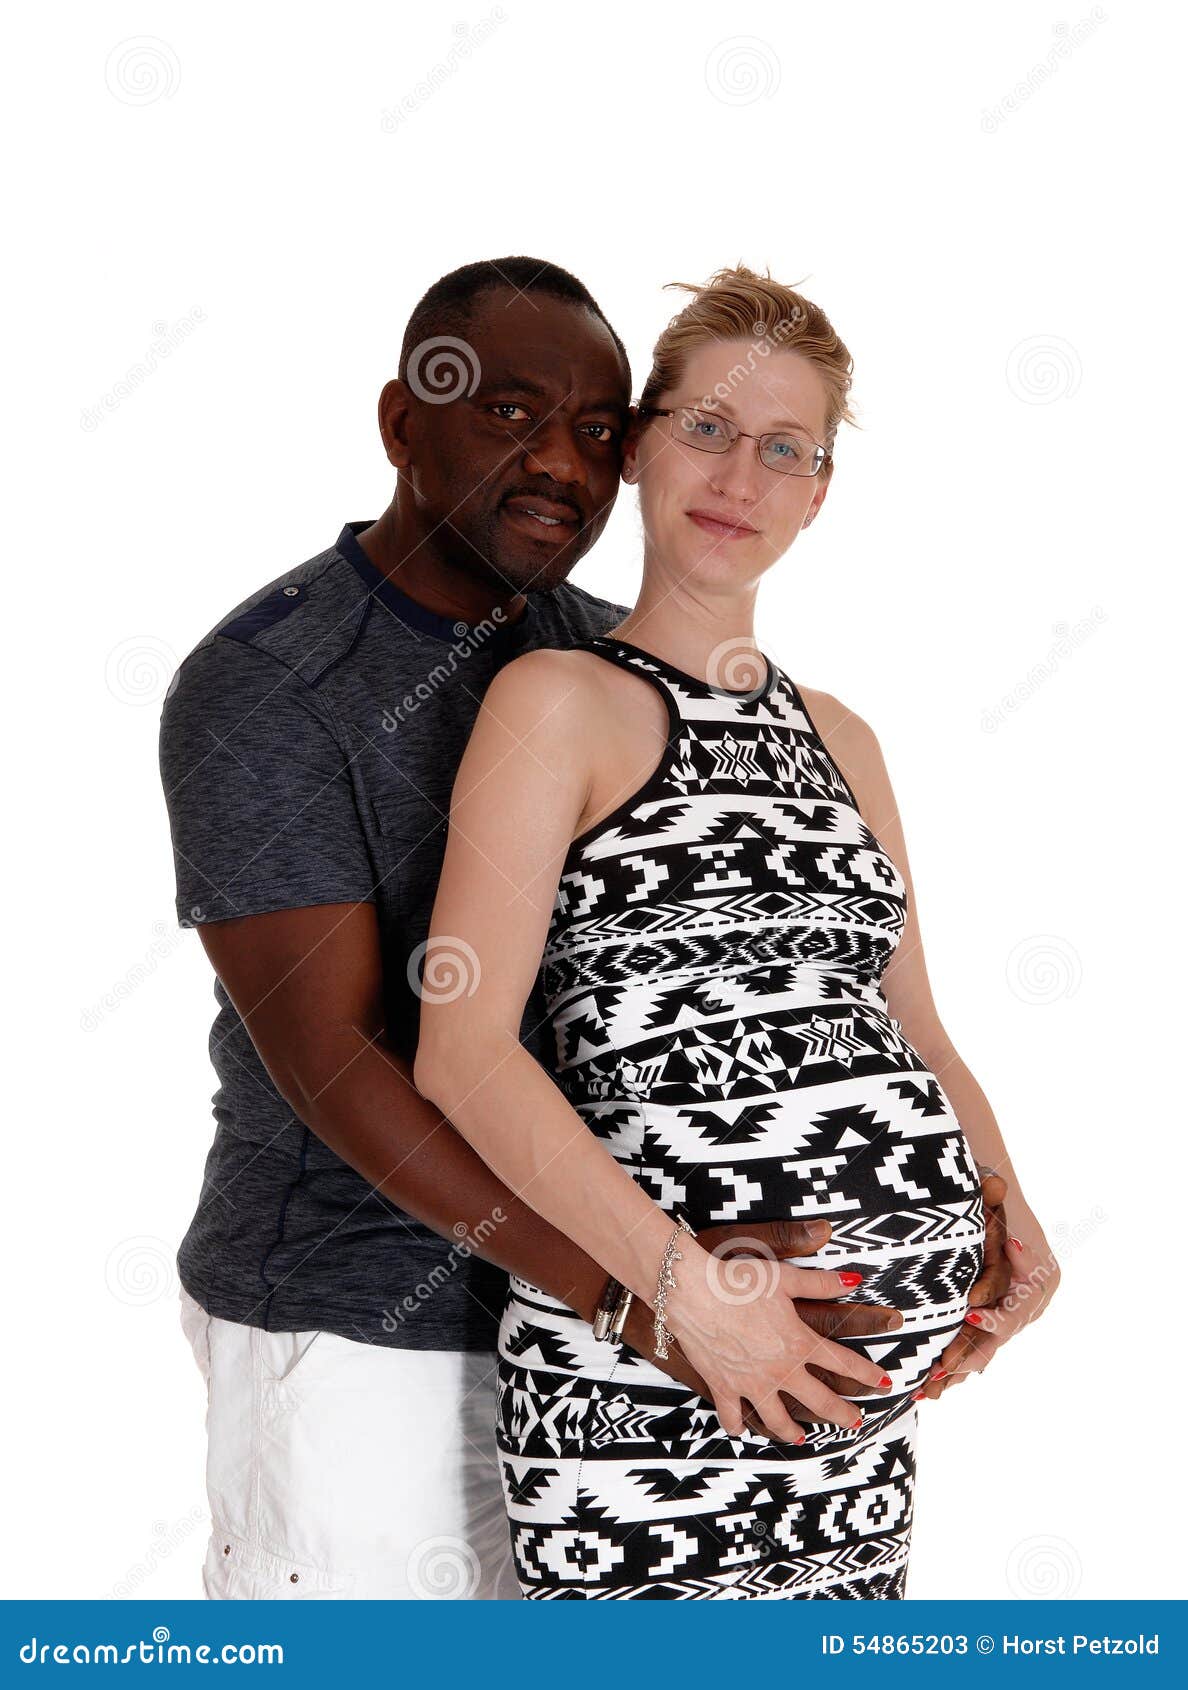 White Woman With Black Man Pictures 35